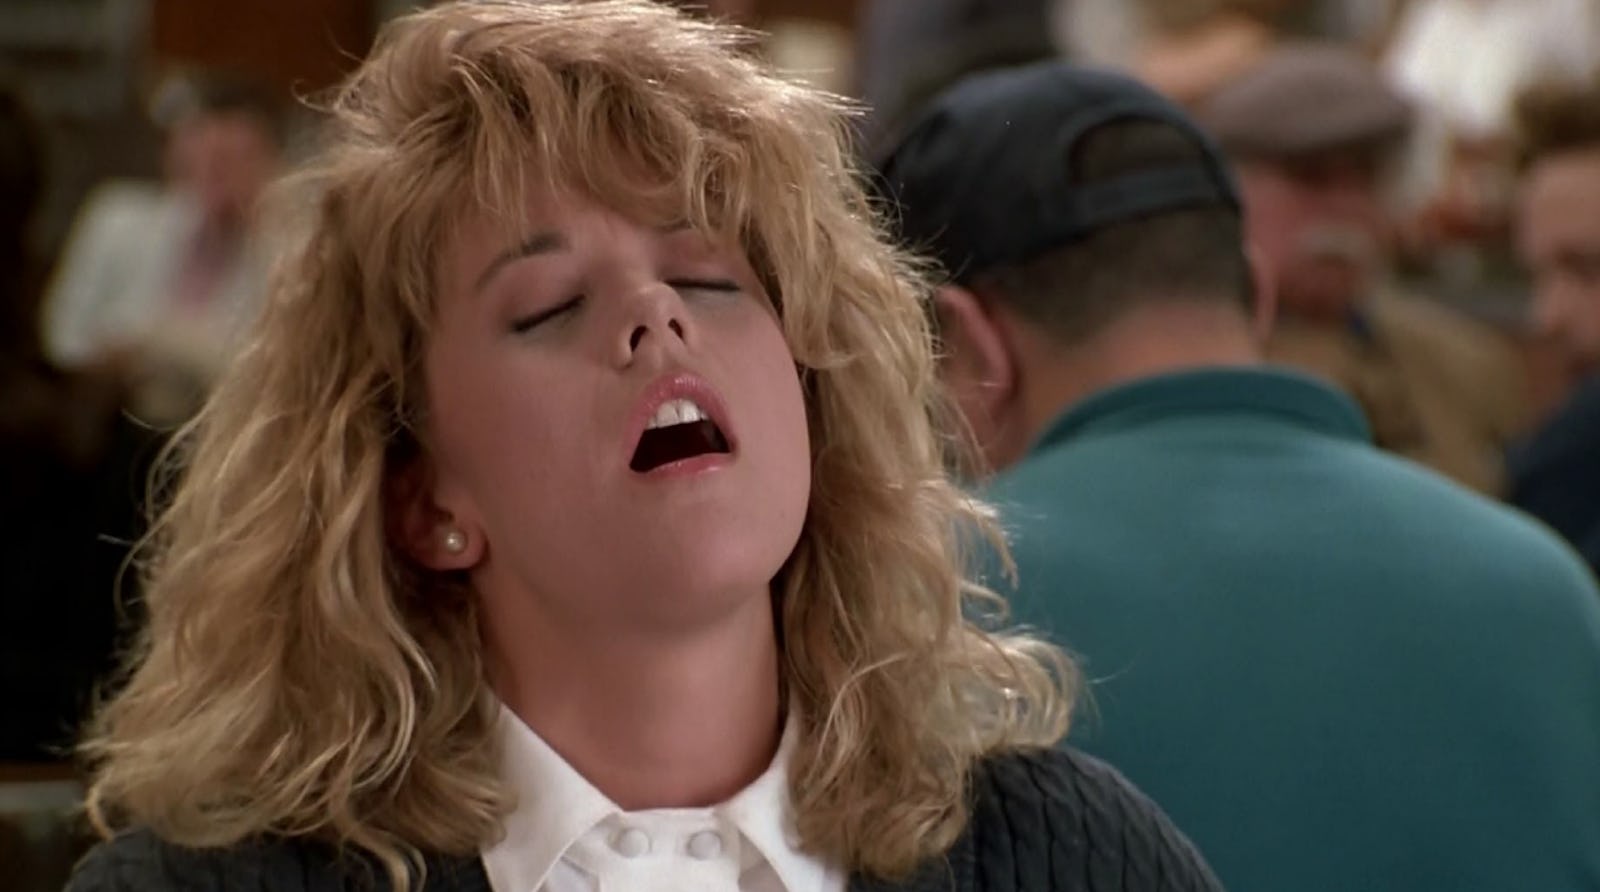 14 Old Euphemisms For Orgasms Because Everybody Deserves To Have Their Marbles Cracked